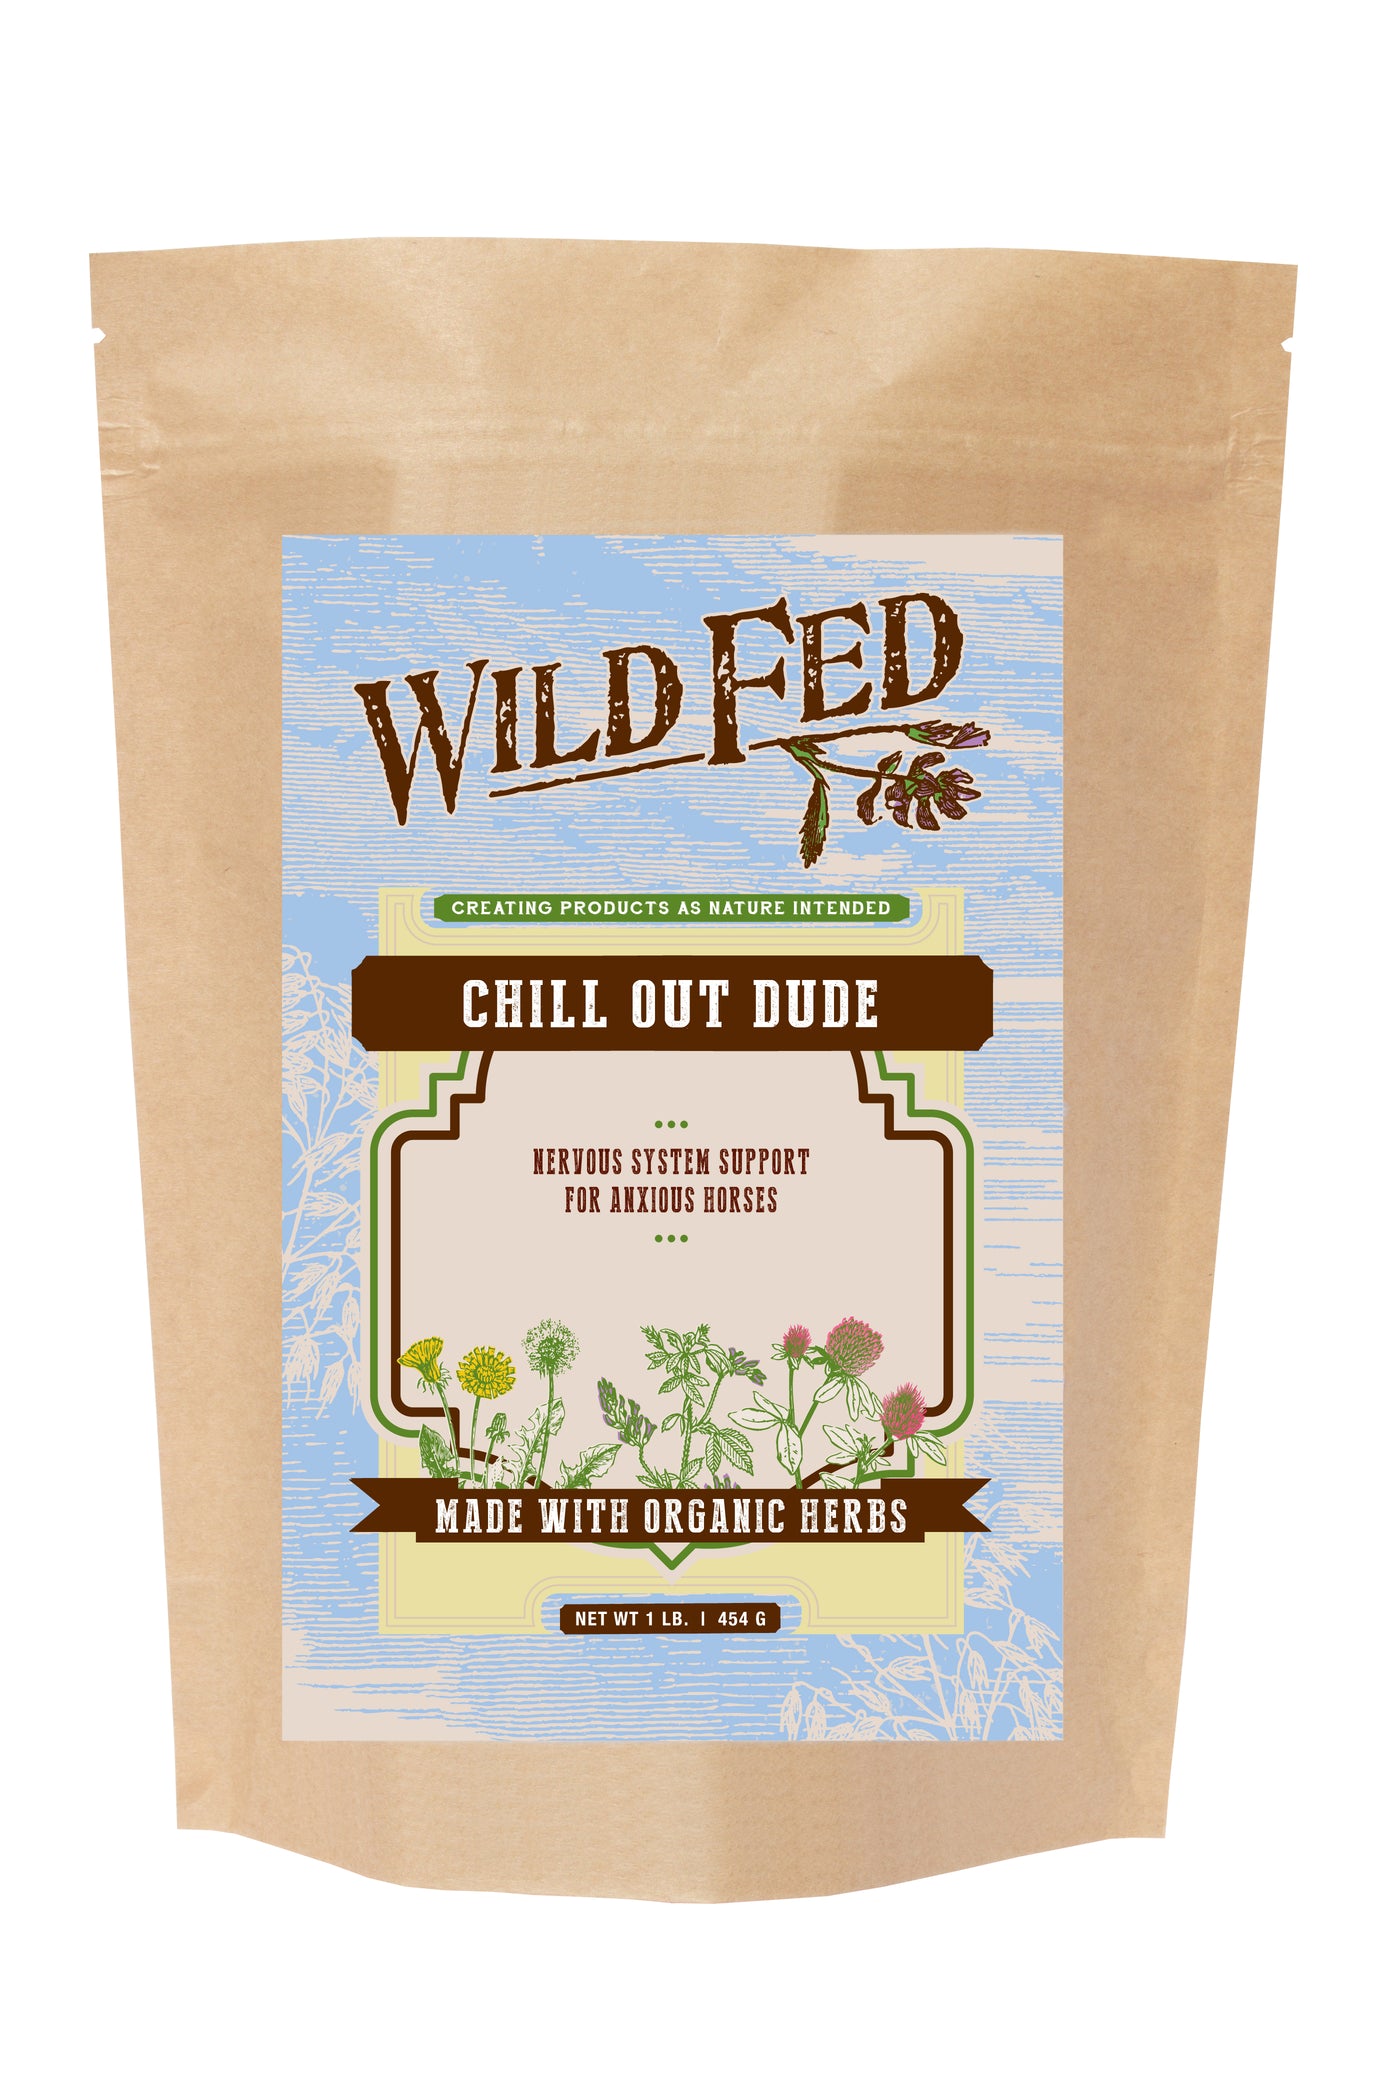 Wild Fed Chill Out Dude Nerve CBD Herbal Supplement for Horses Equine Organic